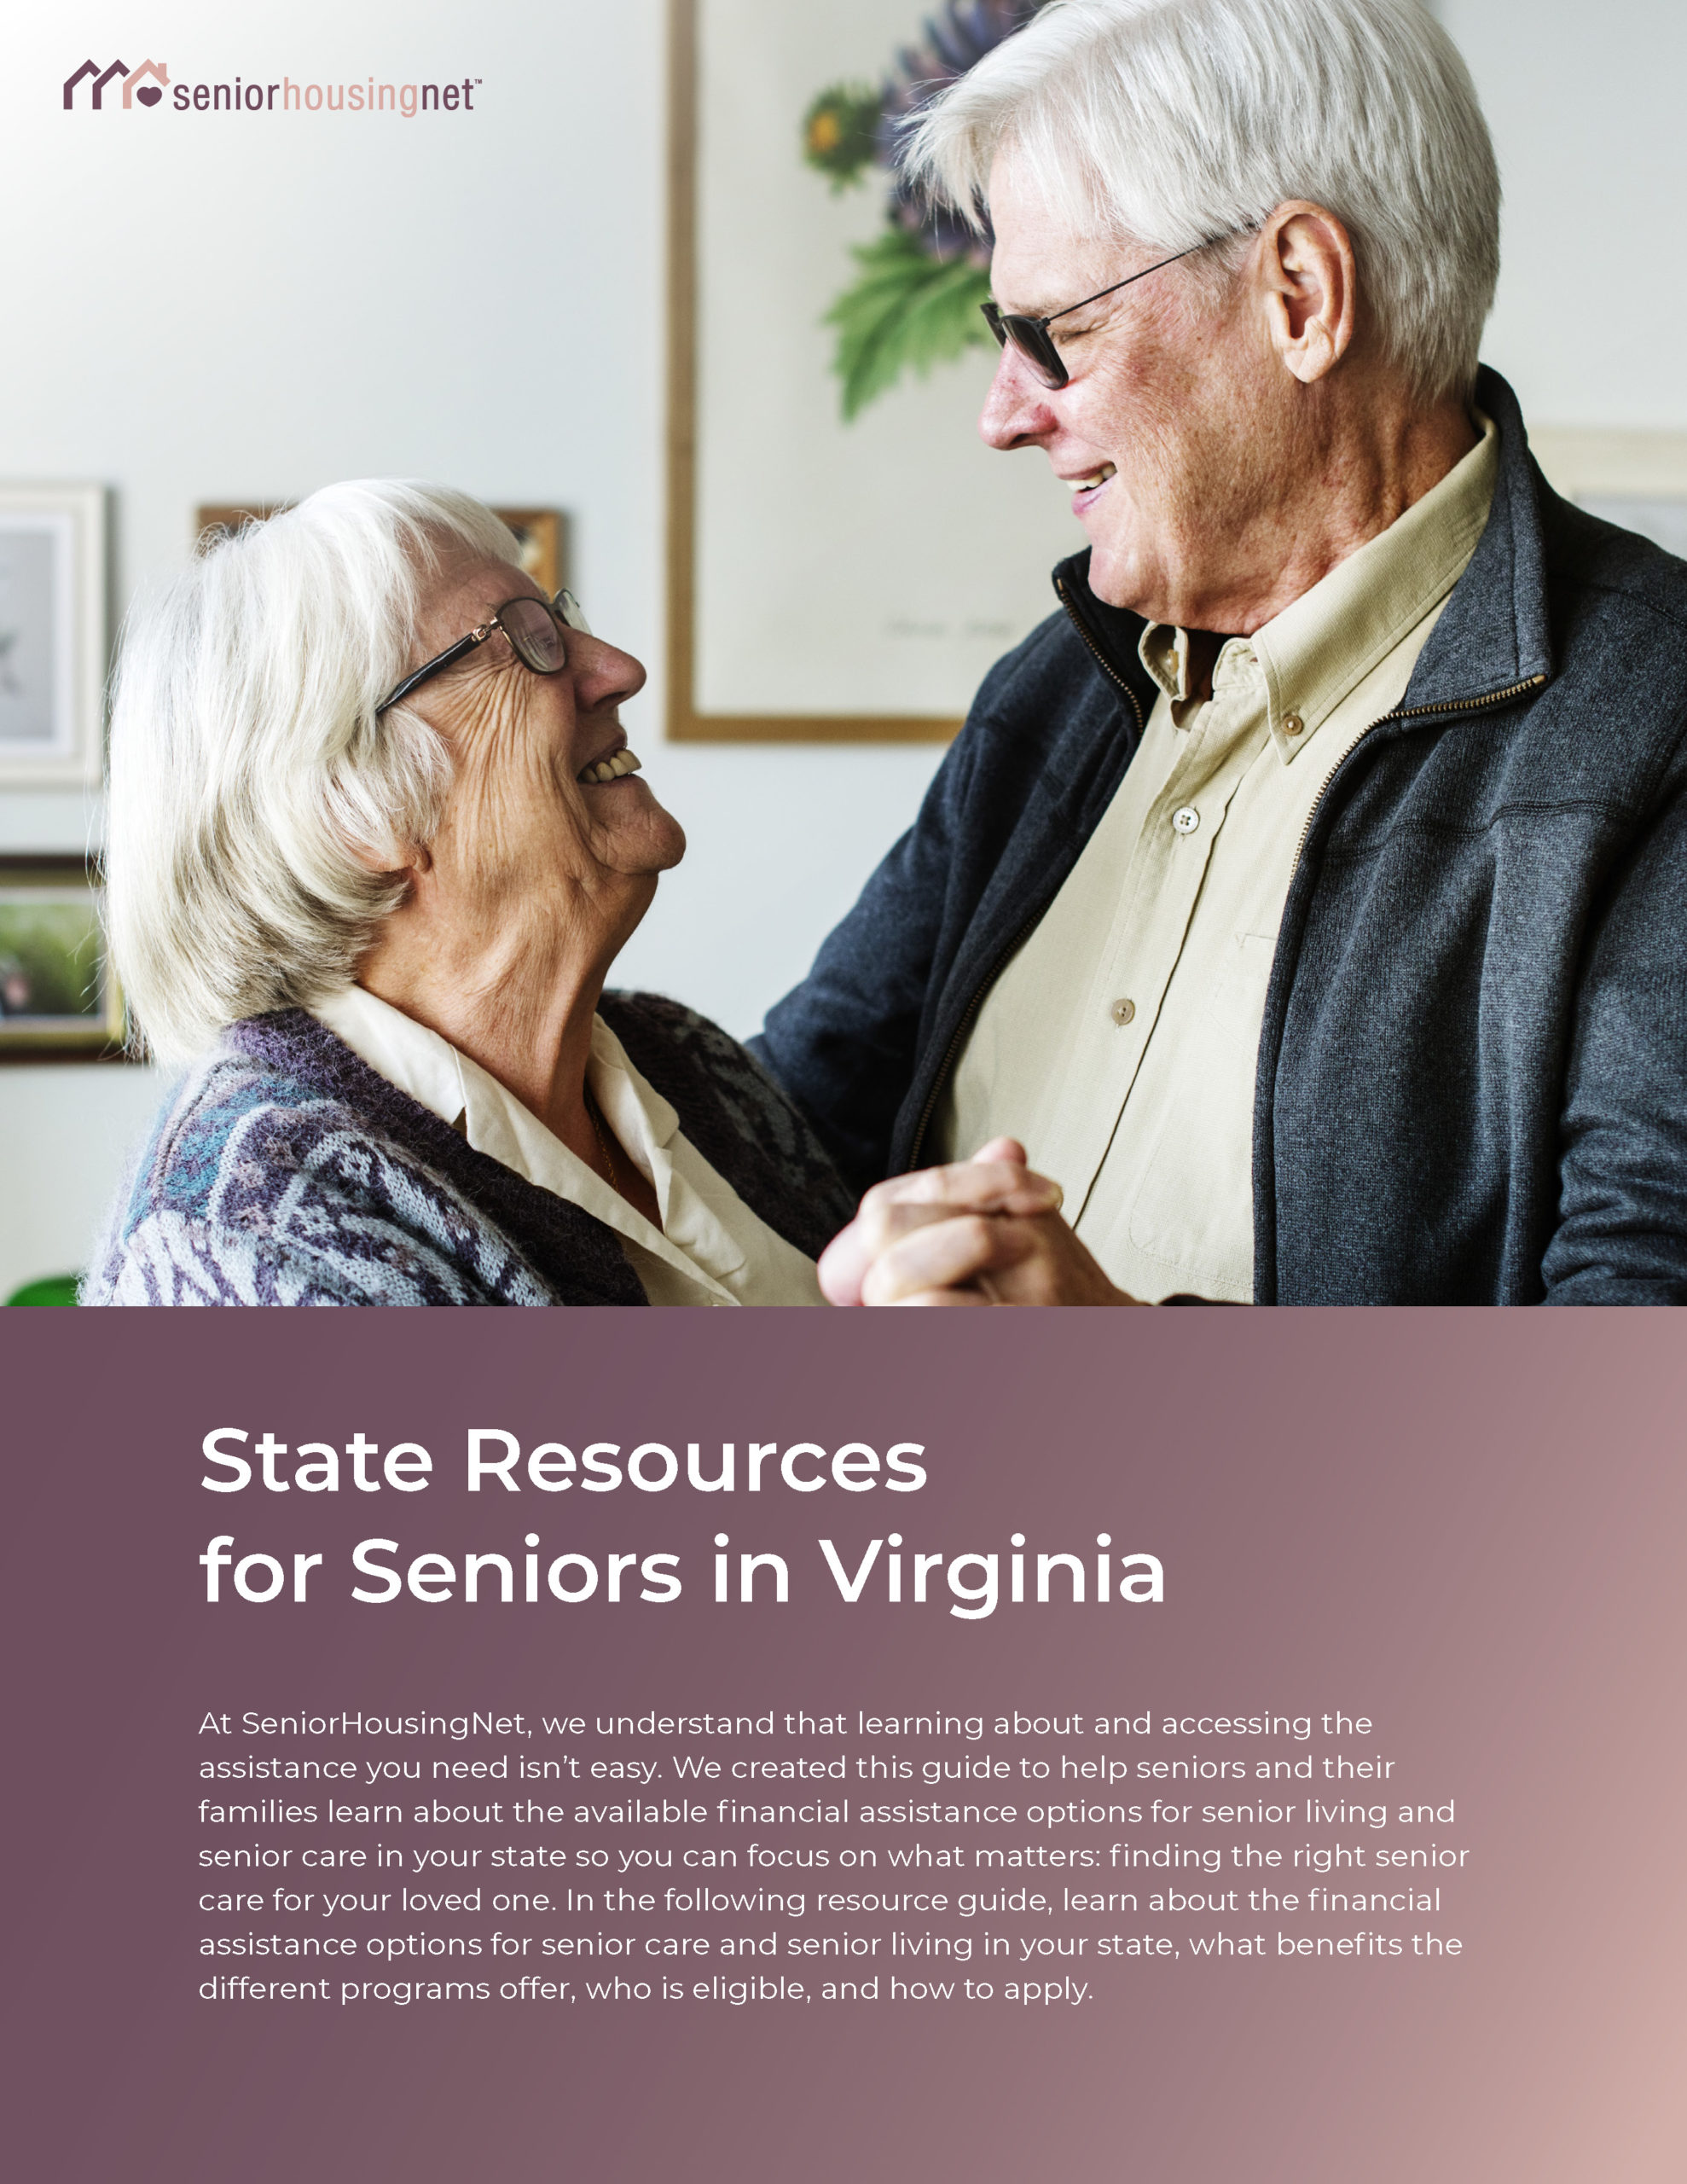 State Resources for Seniors in Virginia